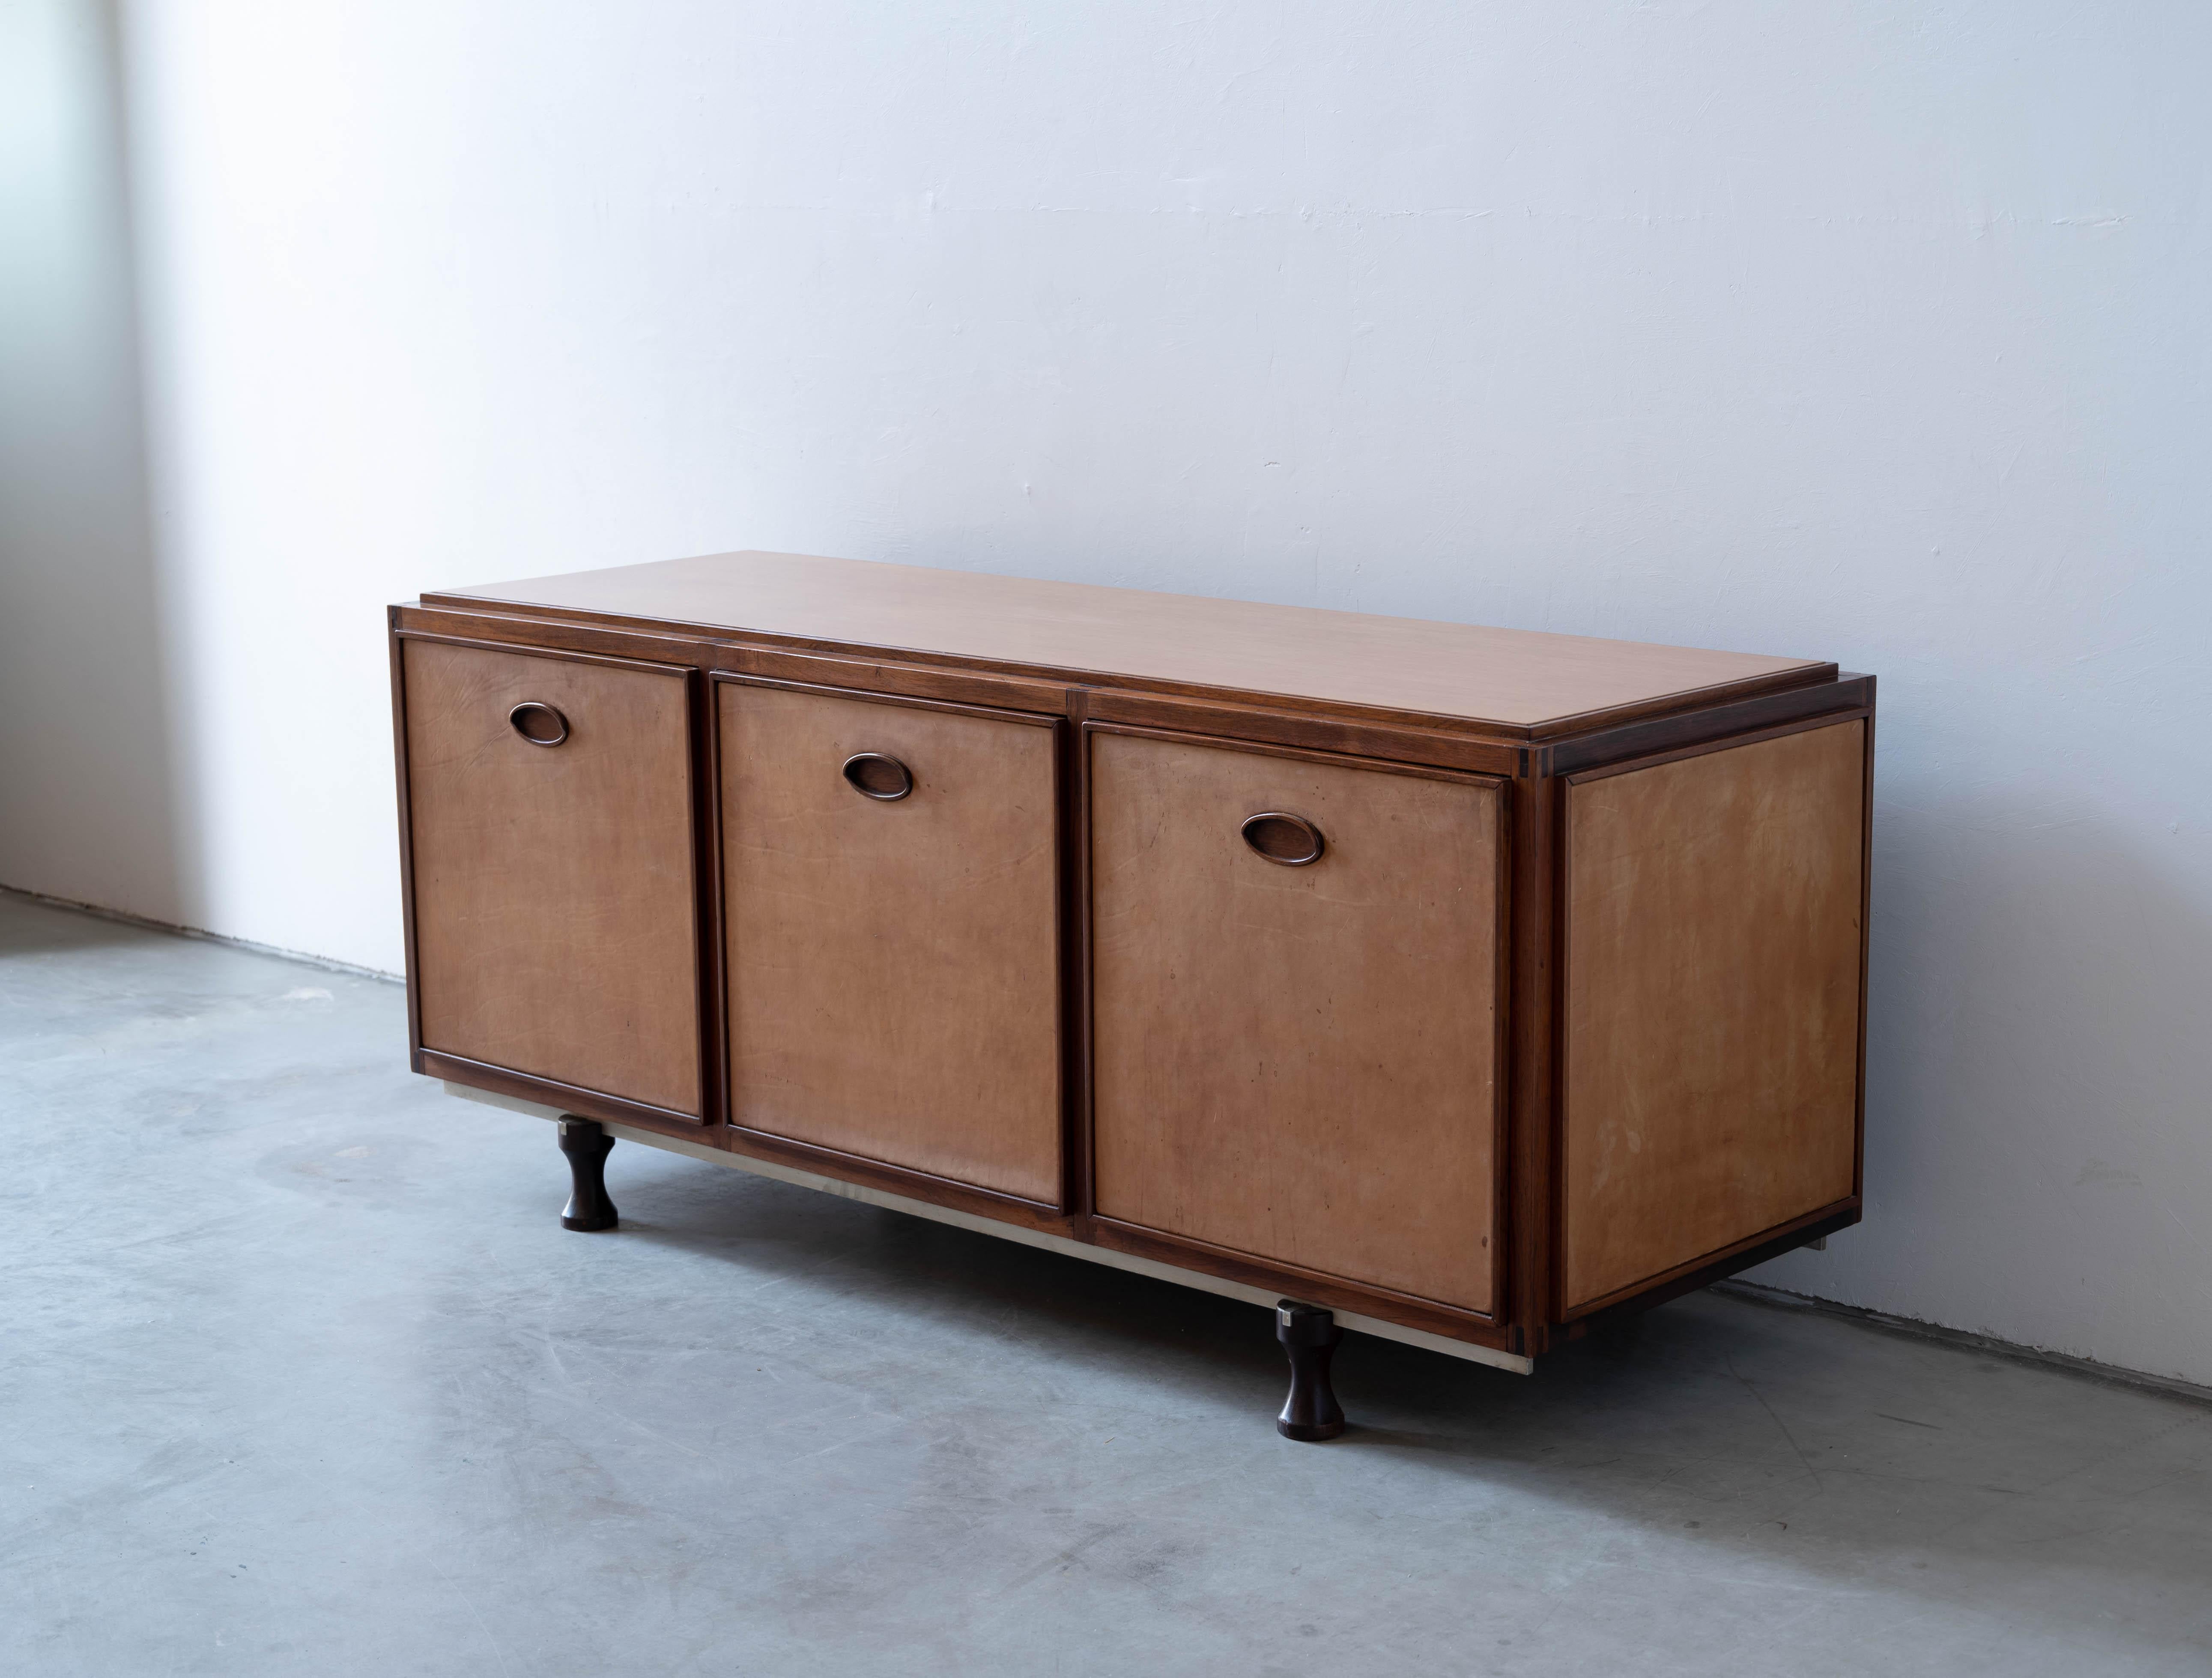 A sizeable and unique custom order cabinet / sideboard / credenza. Designed by Gianfranco Frattini and produced by Bernini, Italy, 1950s.

Features rosewood, leather and steel. All sides finished with leather, enabling the cabinet to be